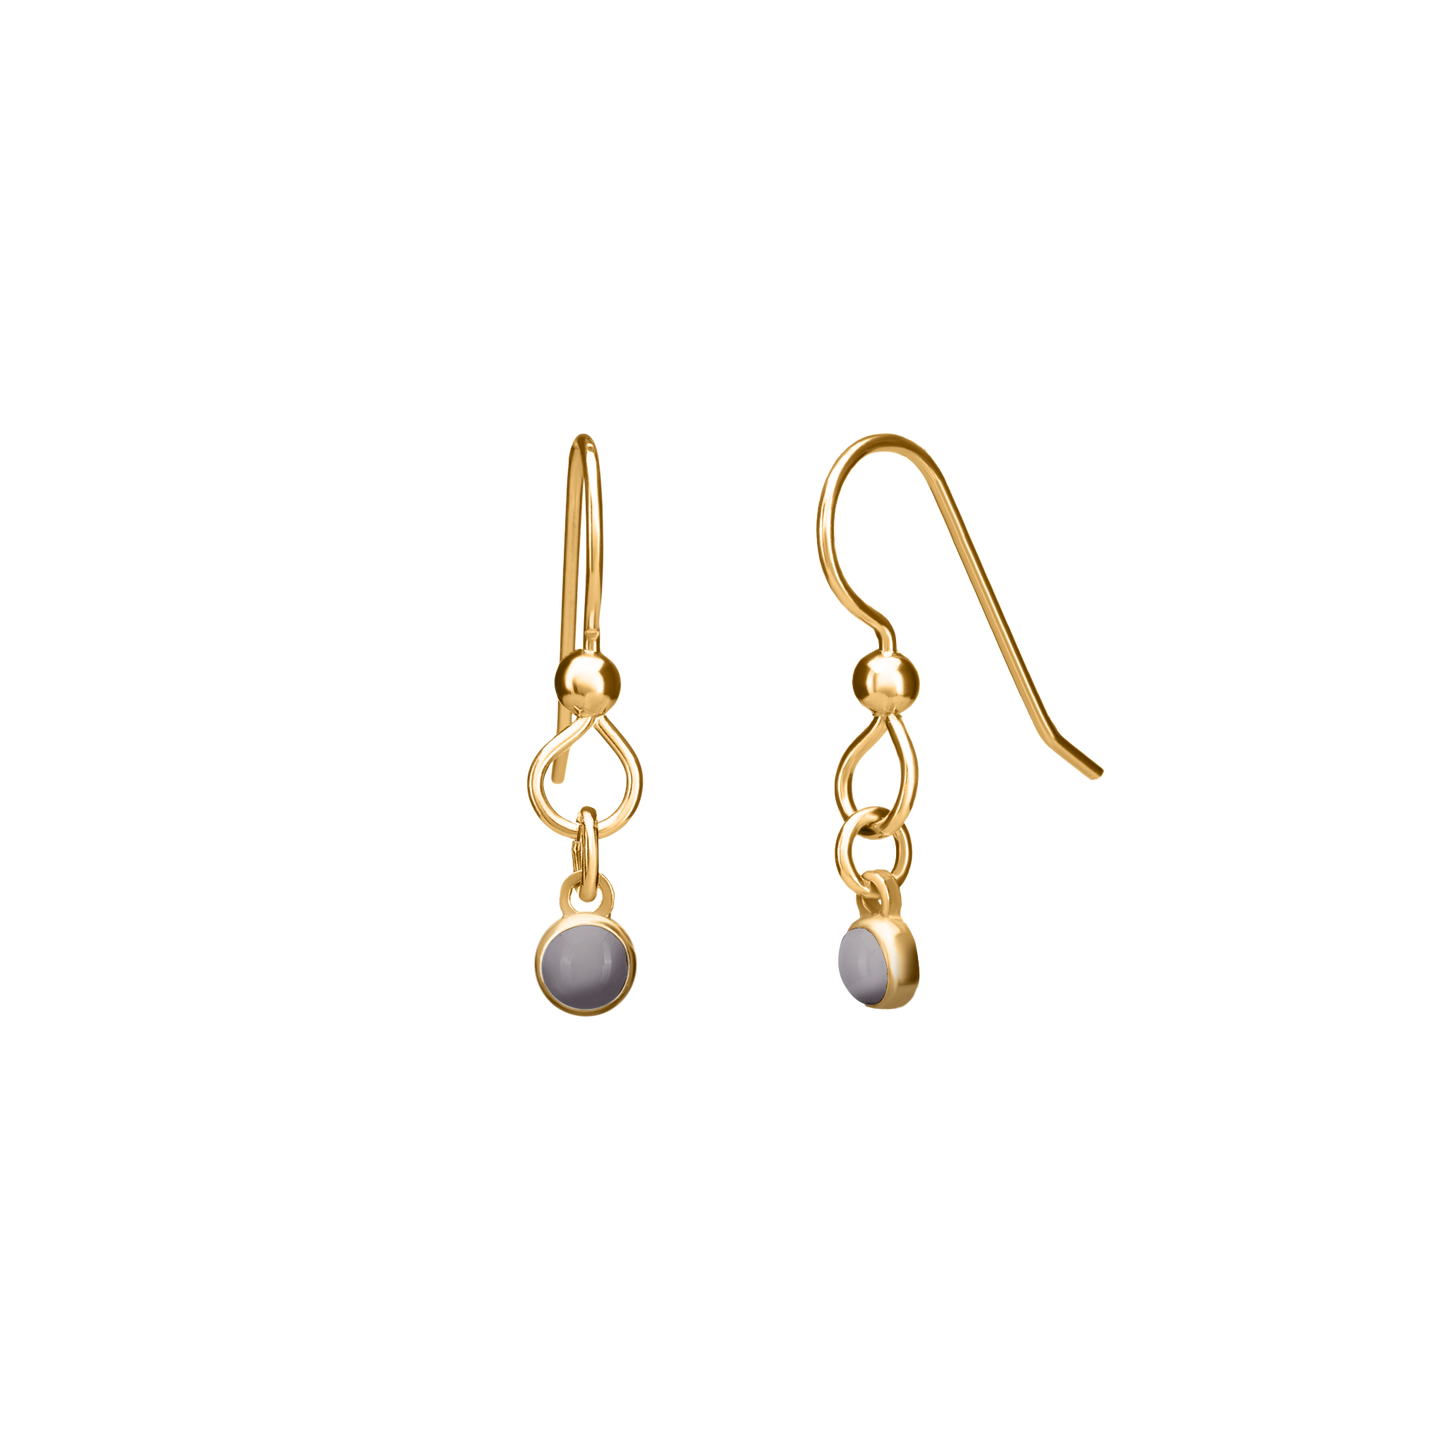 THE PERFECT EARRING  in 14k gold vermeil